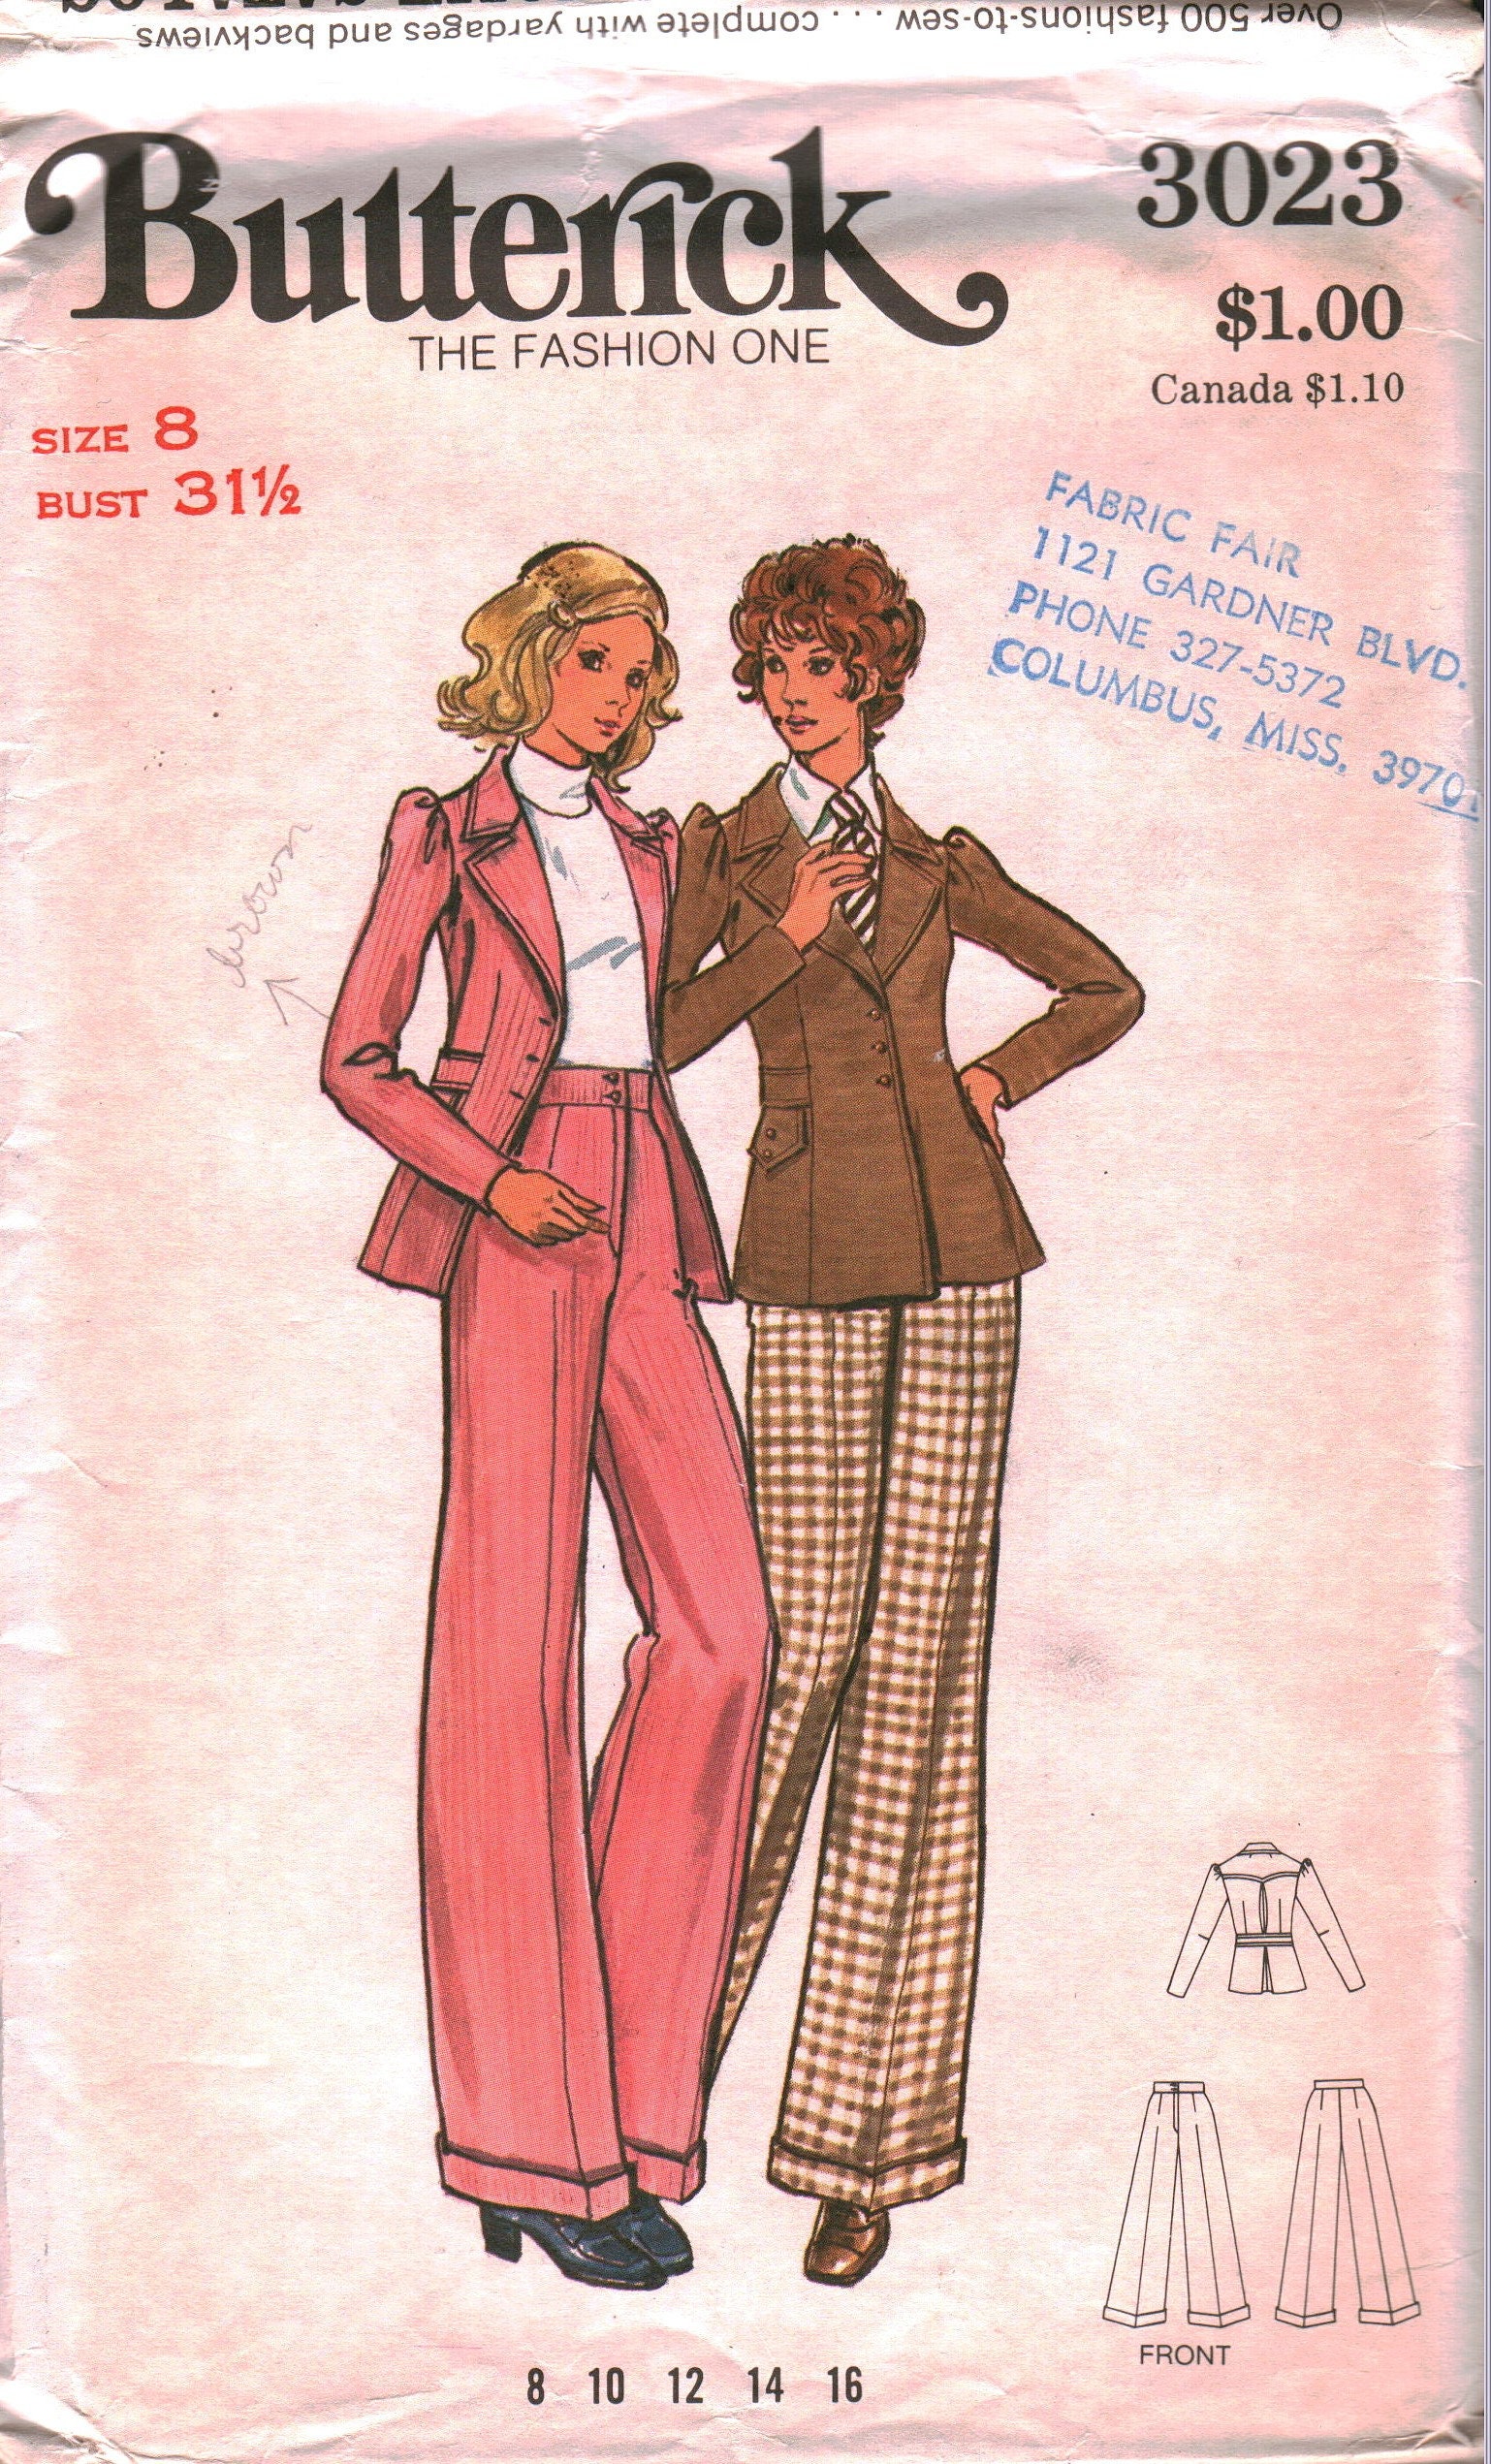 Vintage 1970s Tandy Leather Men's Top Coat Jacket Sewing Pattern